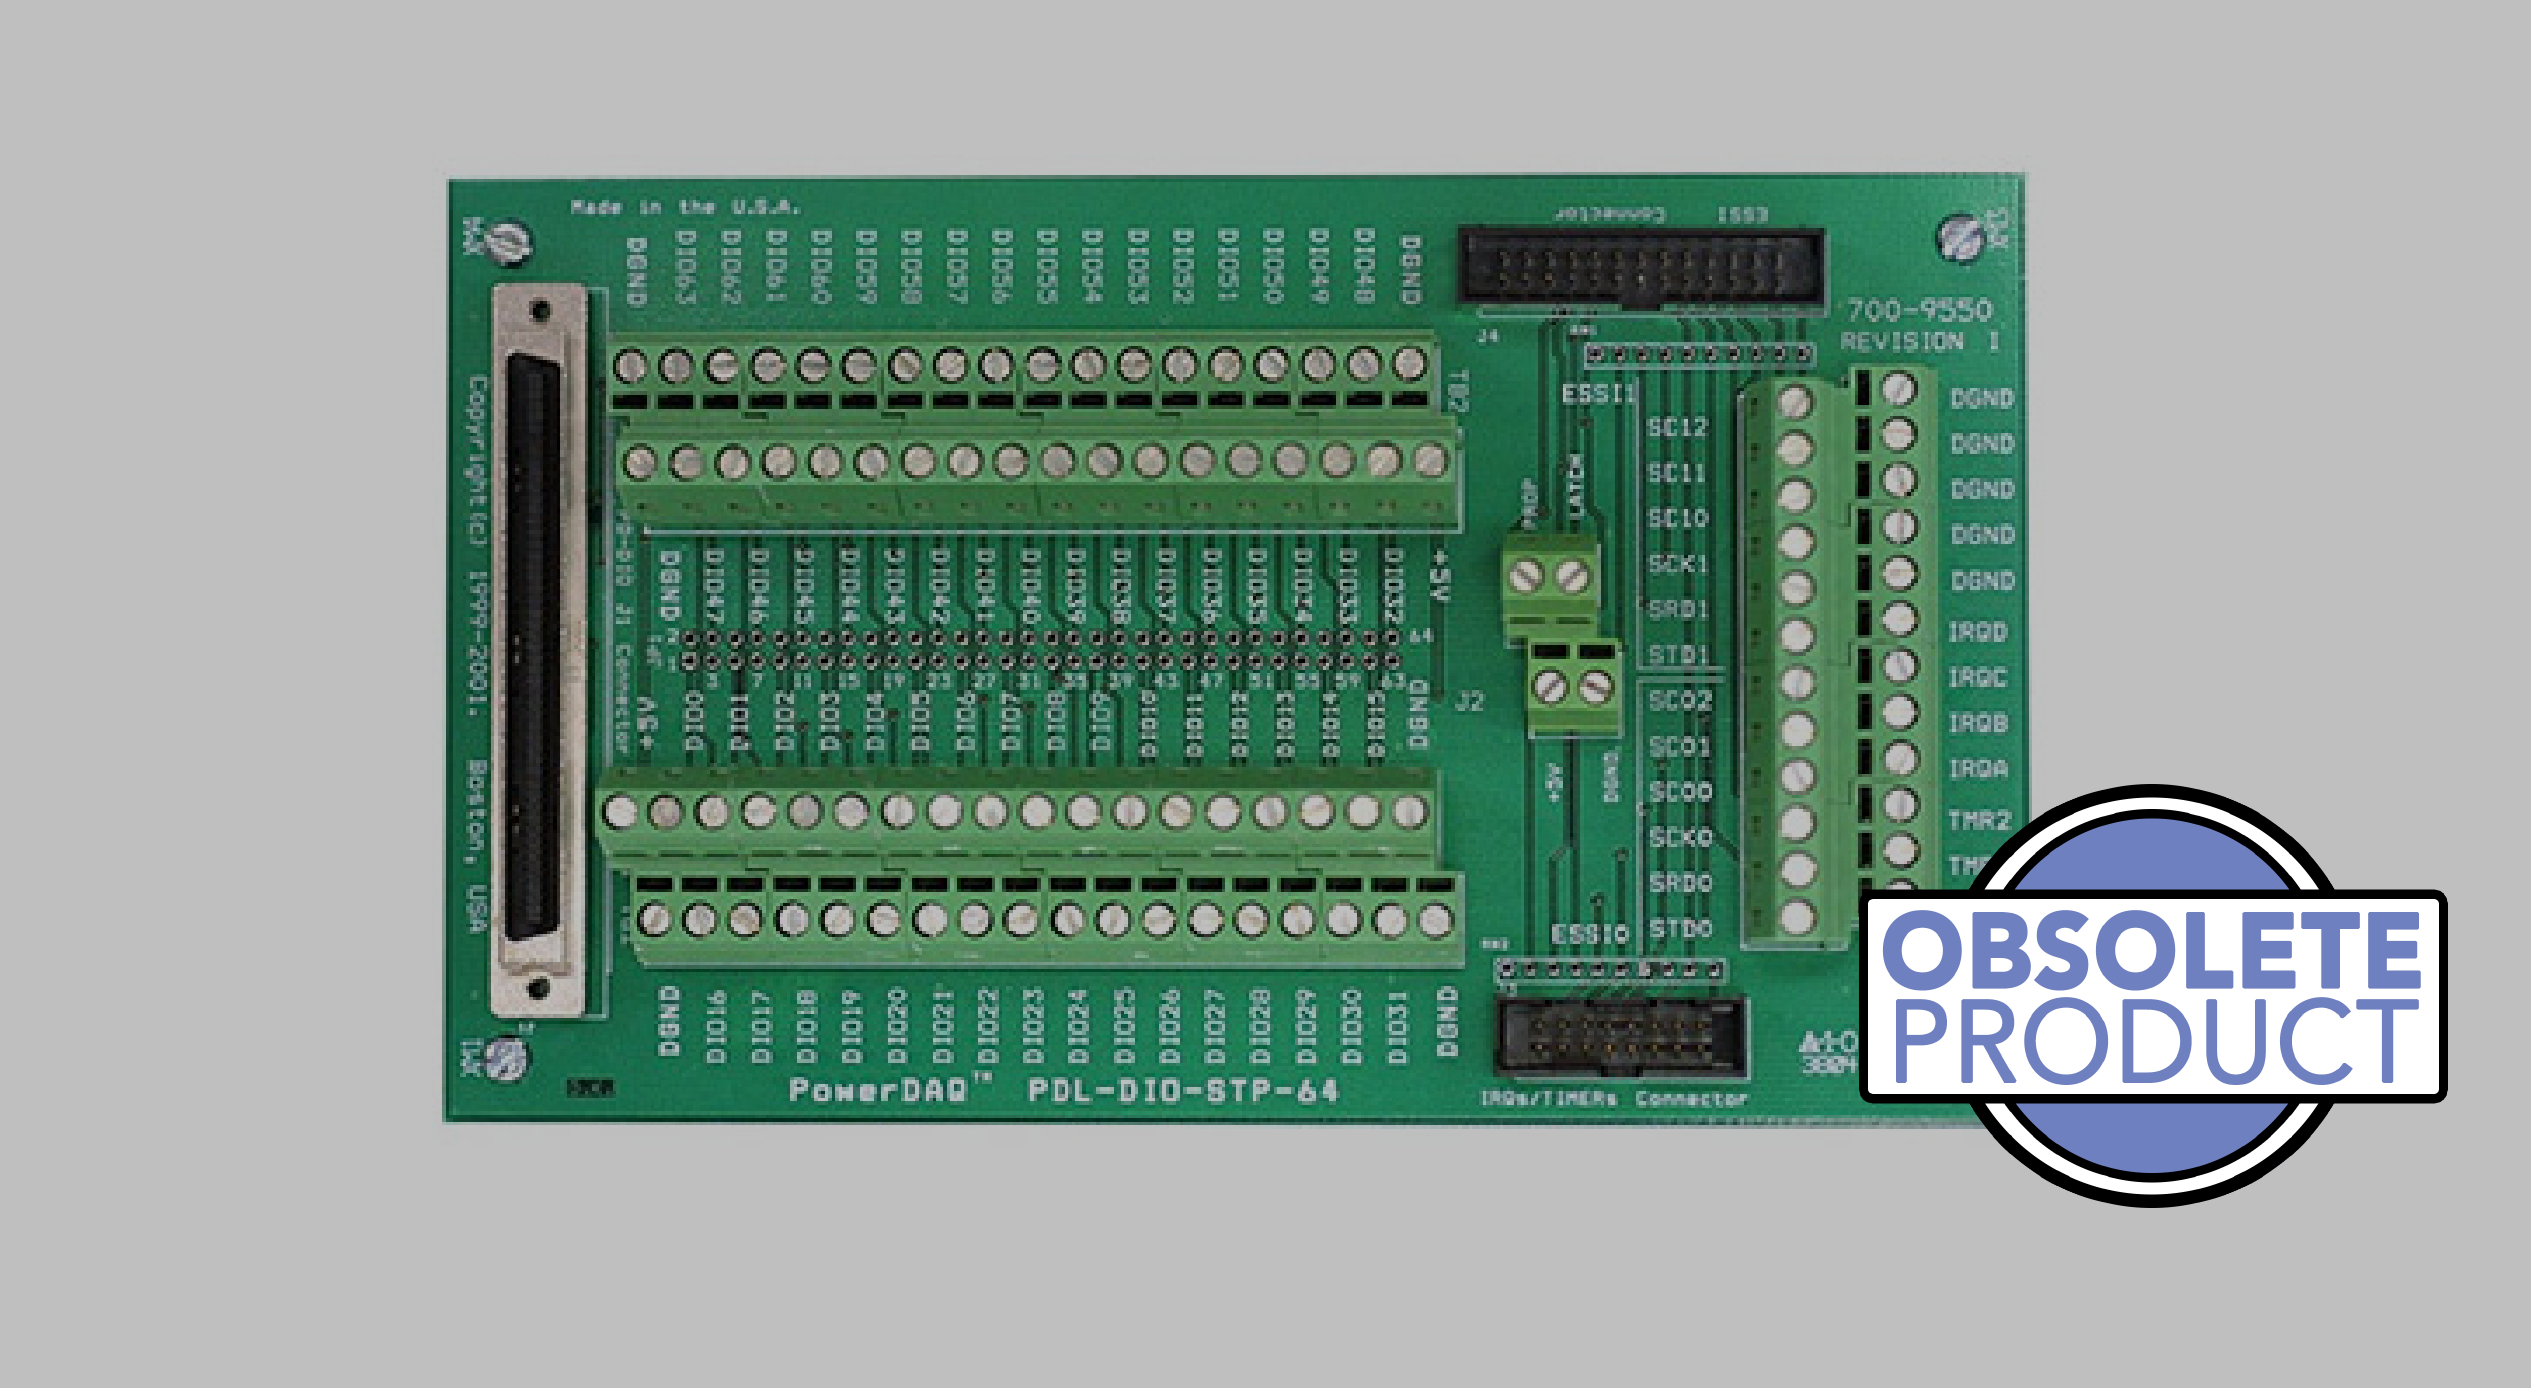 64-channel screw-terminal panel